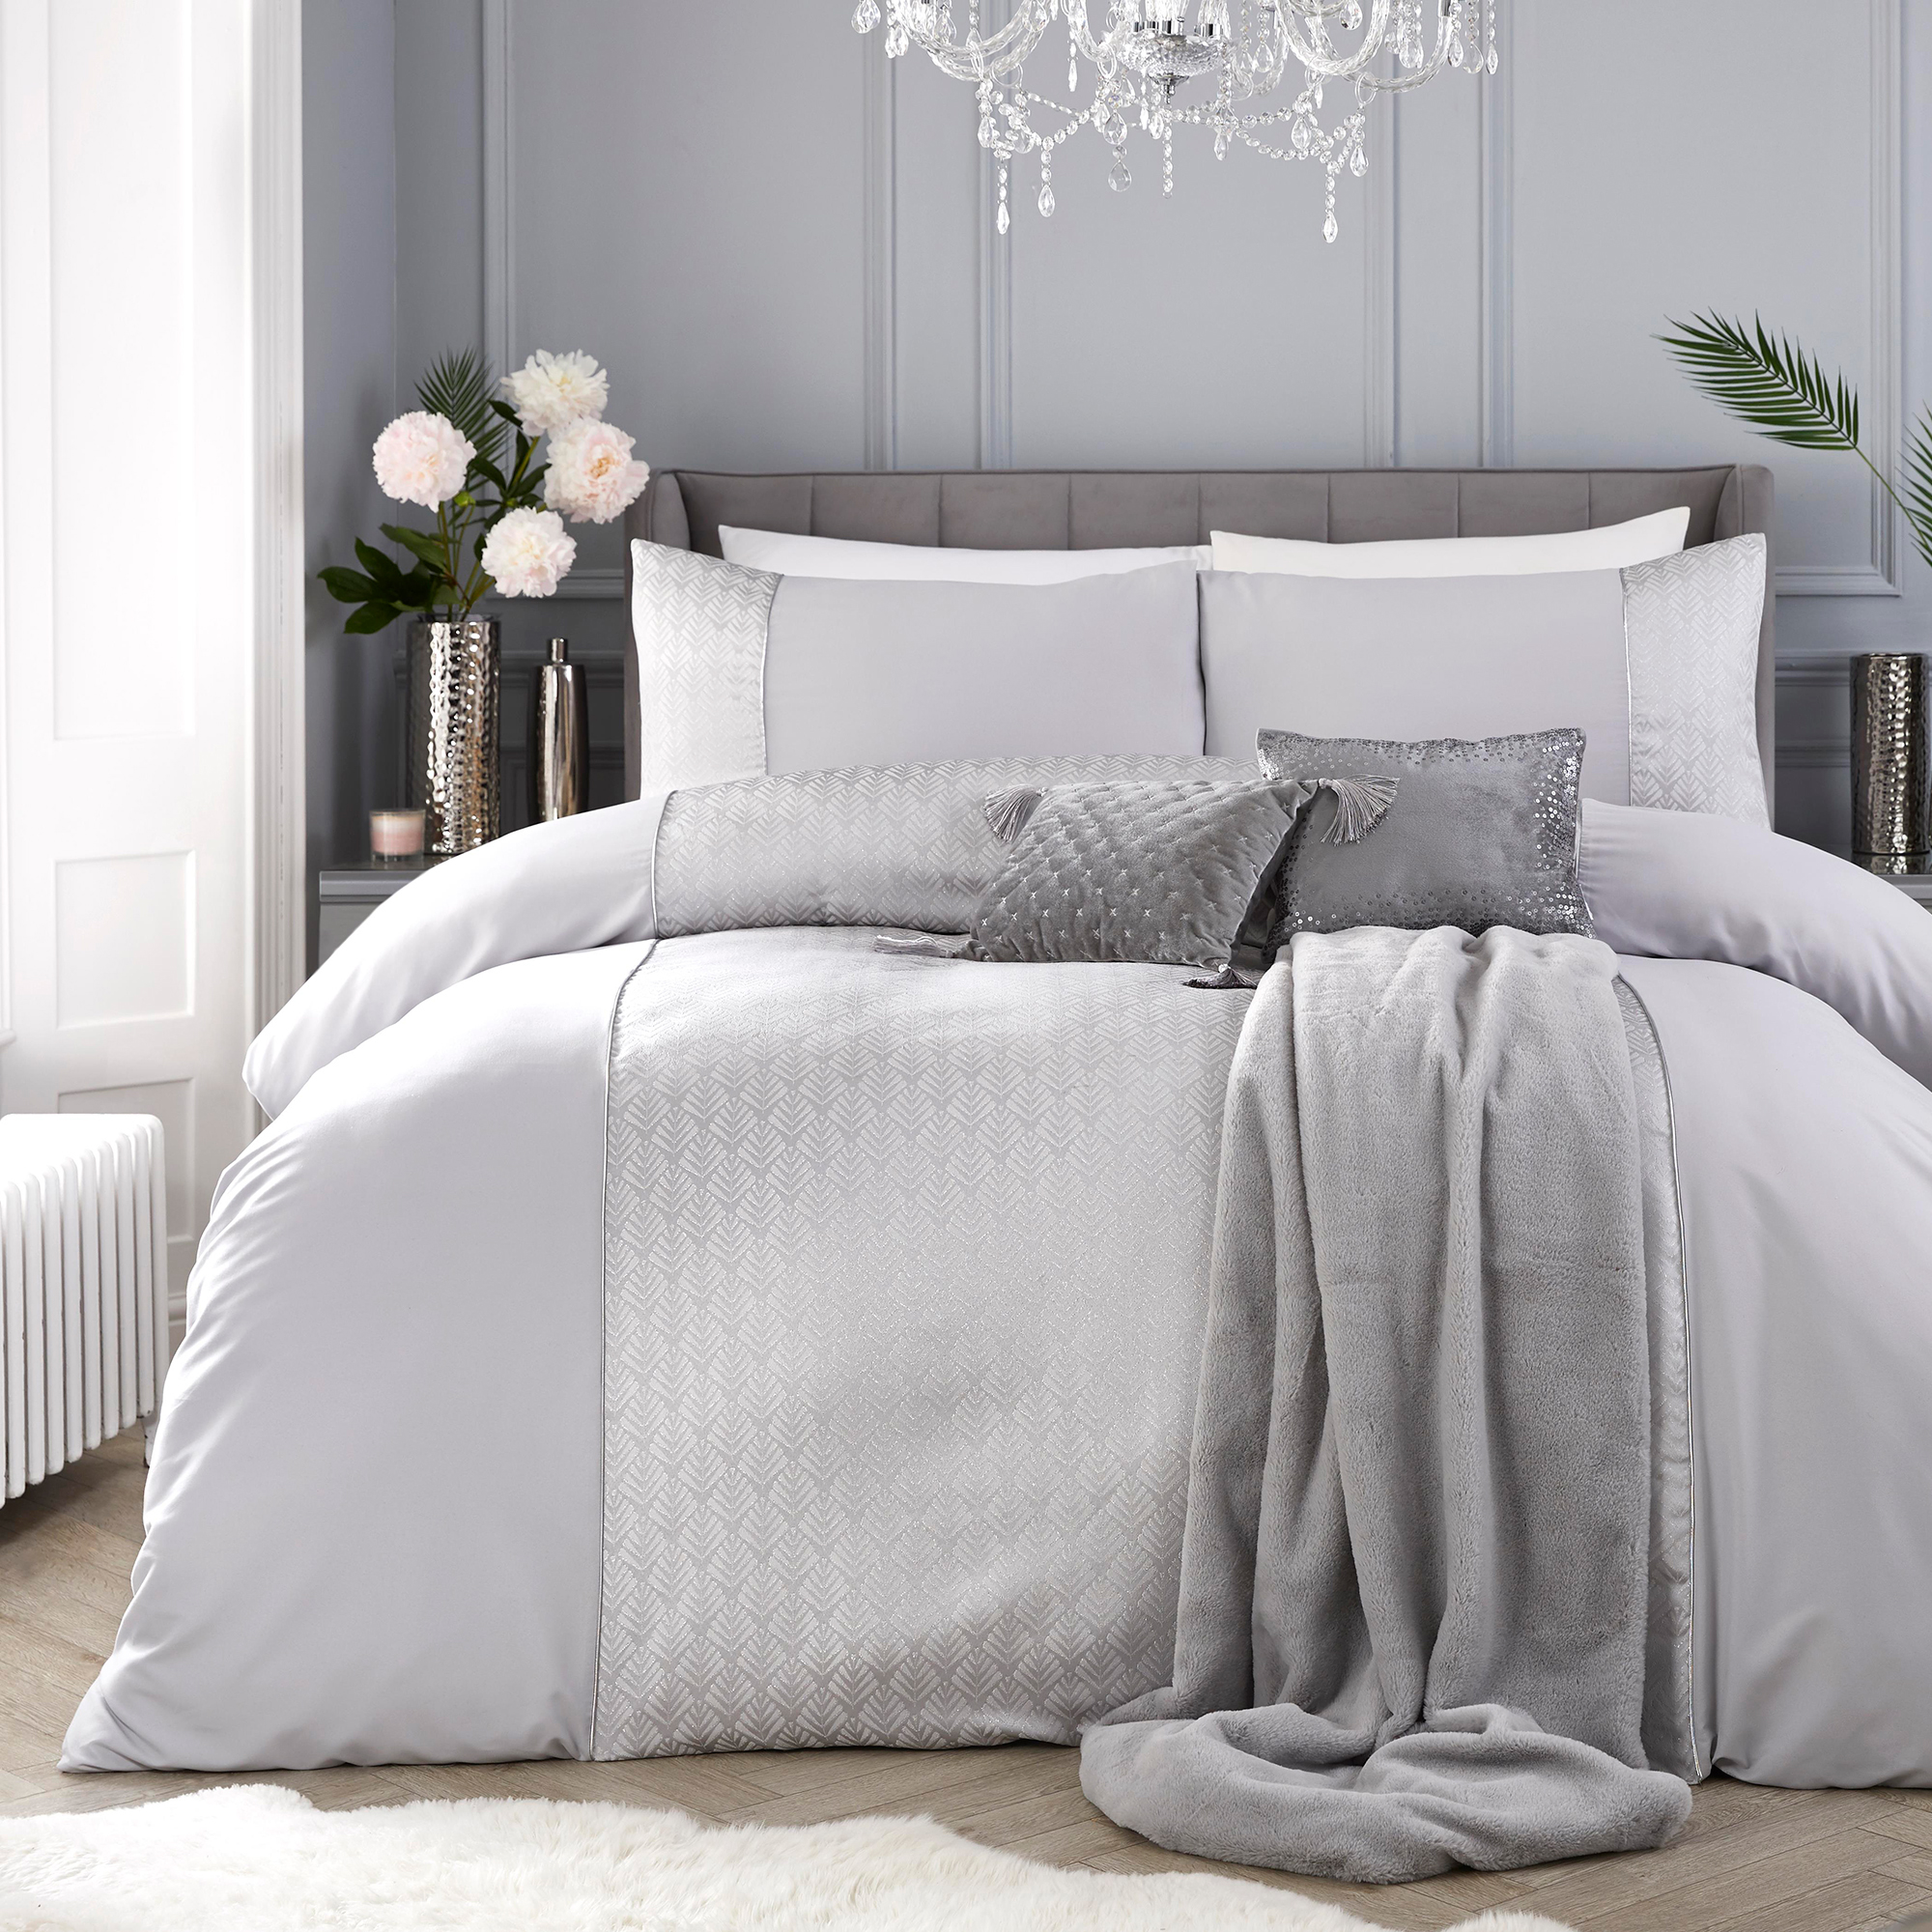 By Ca Bed Linen Lana, Sparkly Silver Duvet Cover Sets